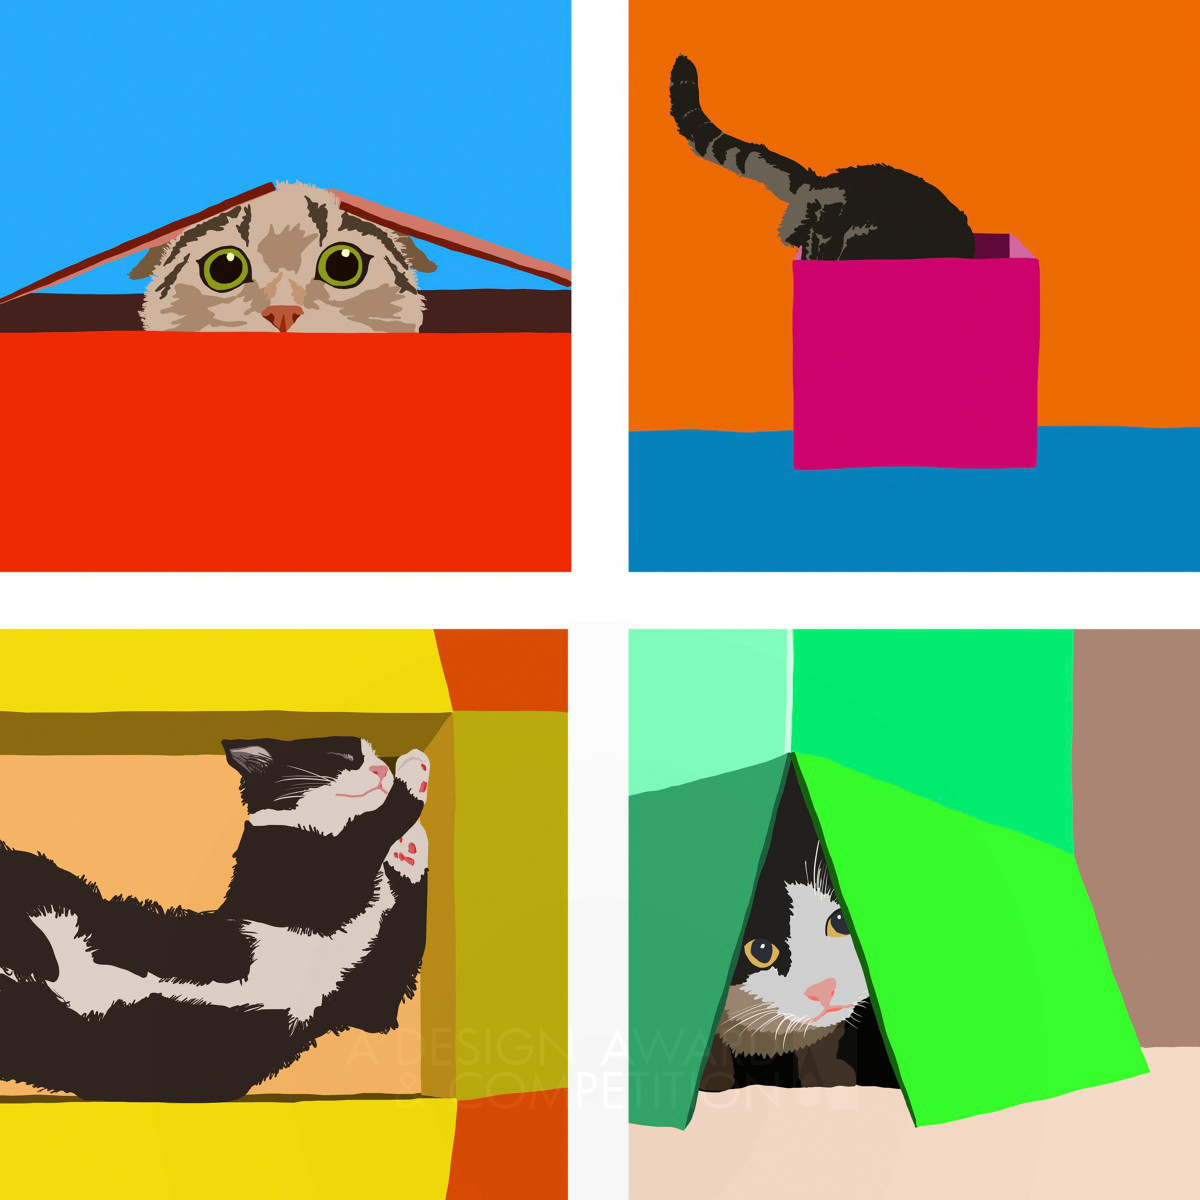 Cats in a Box Communication Design